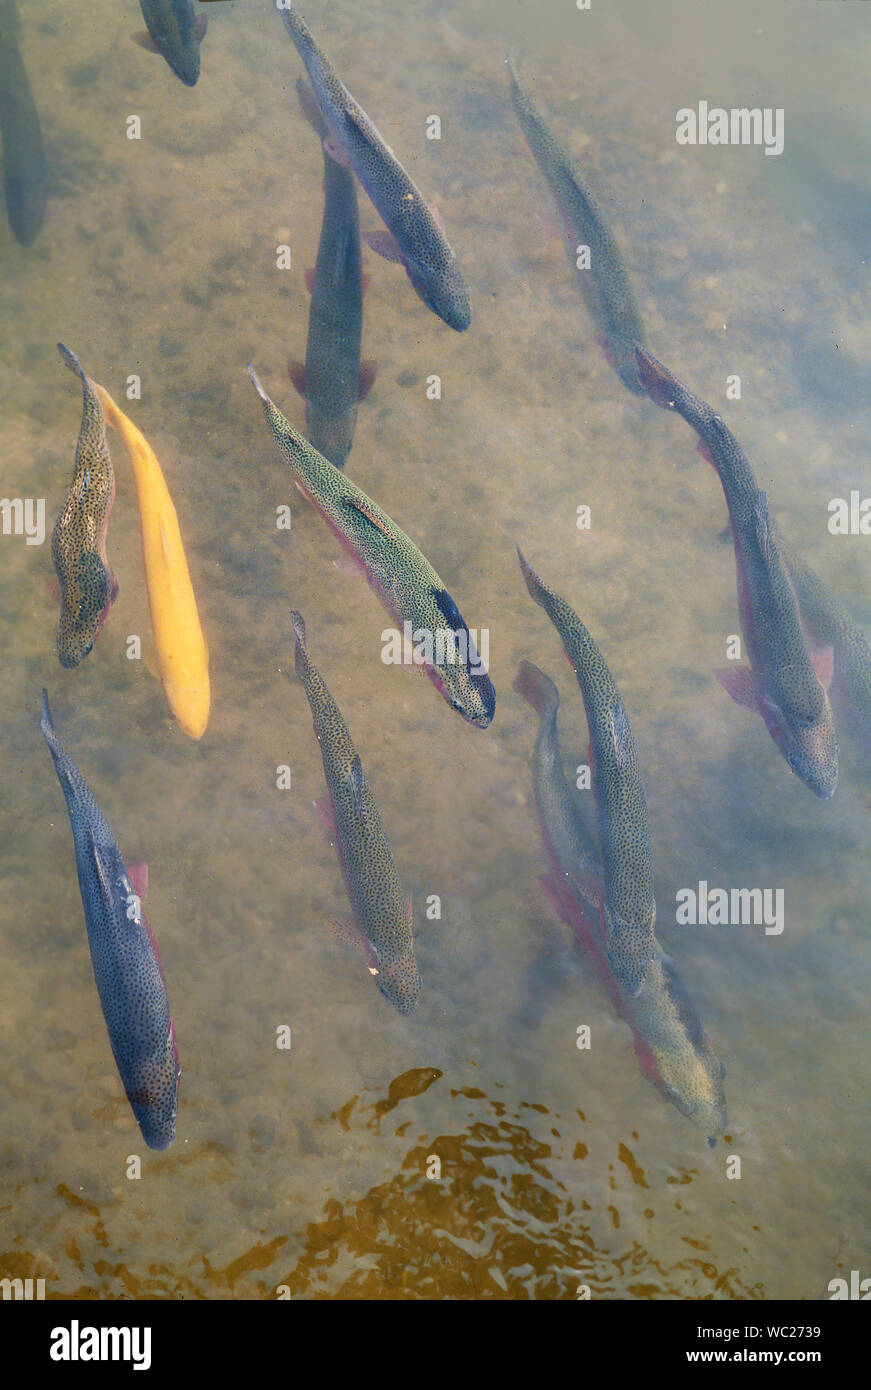 Freshwater fish in a stream, viewed from above, Rainbow trout, Oncorhynchus mykiss Stock Photo